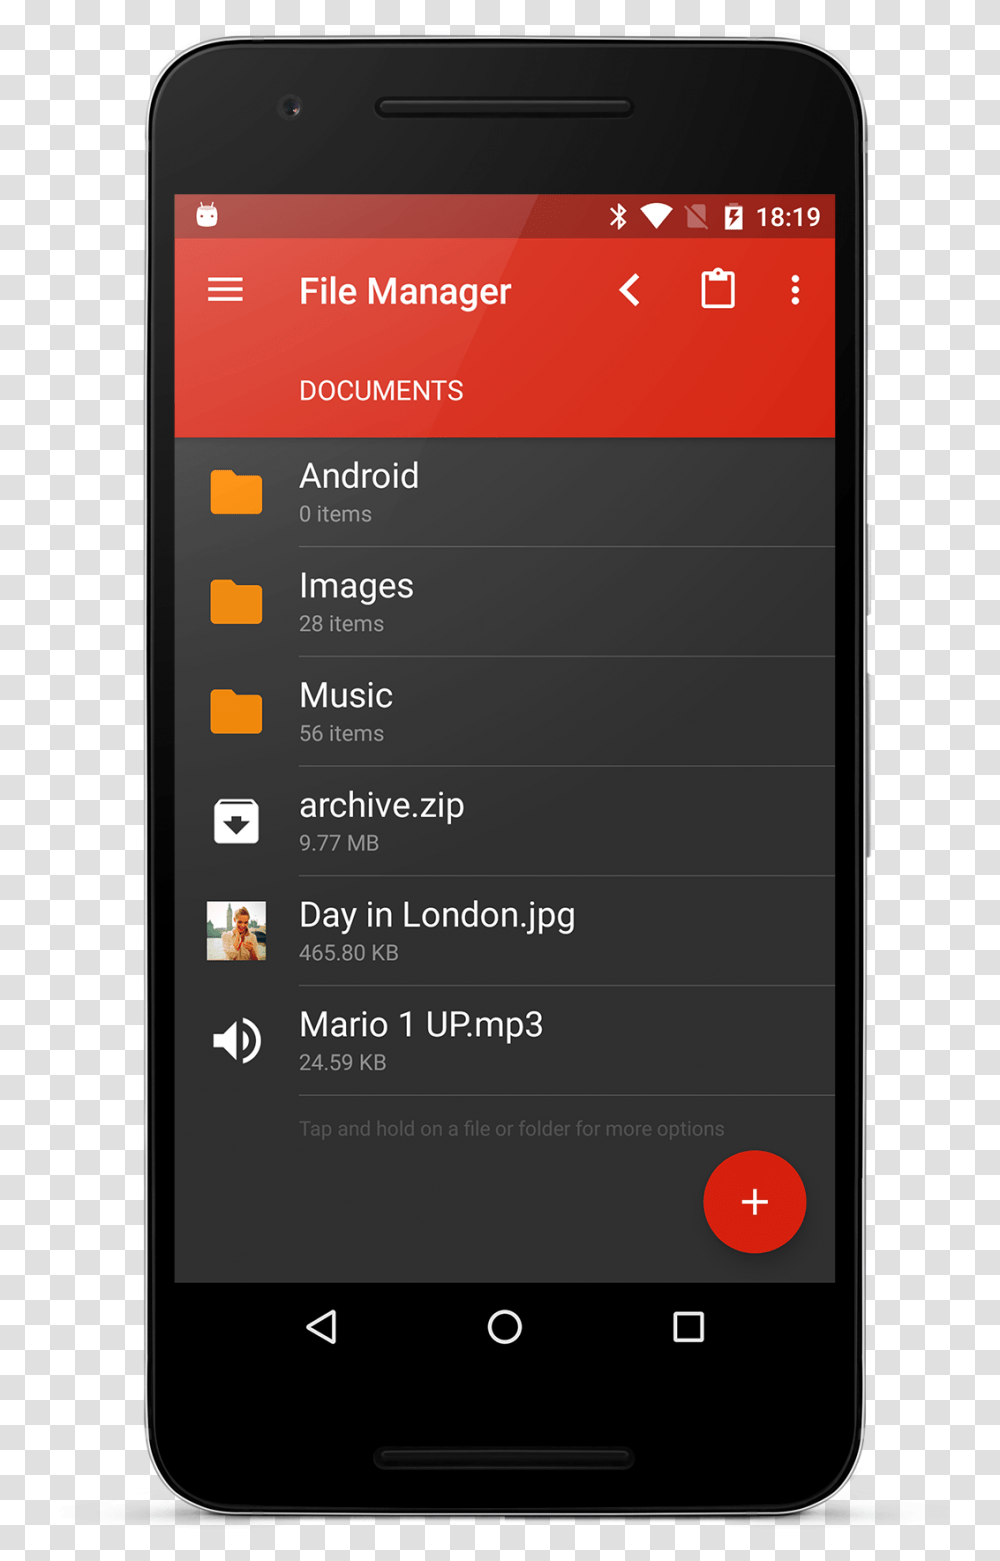 File Manager Apps Apk, Mobile Phone, Electronics, Cell Phone, Iphone Transparent Png